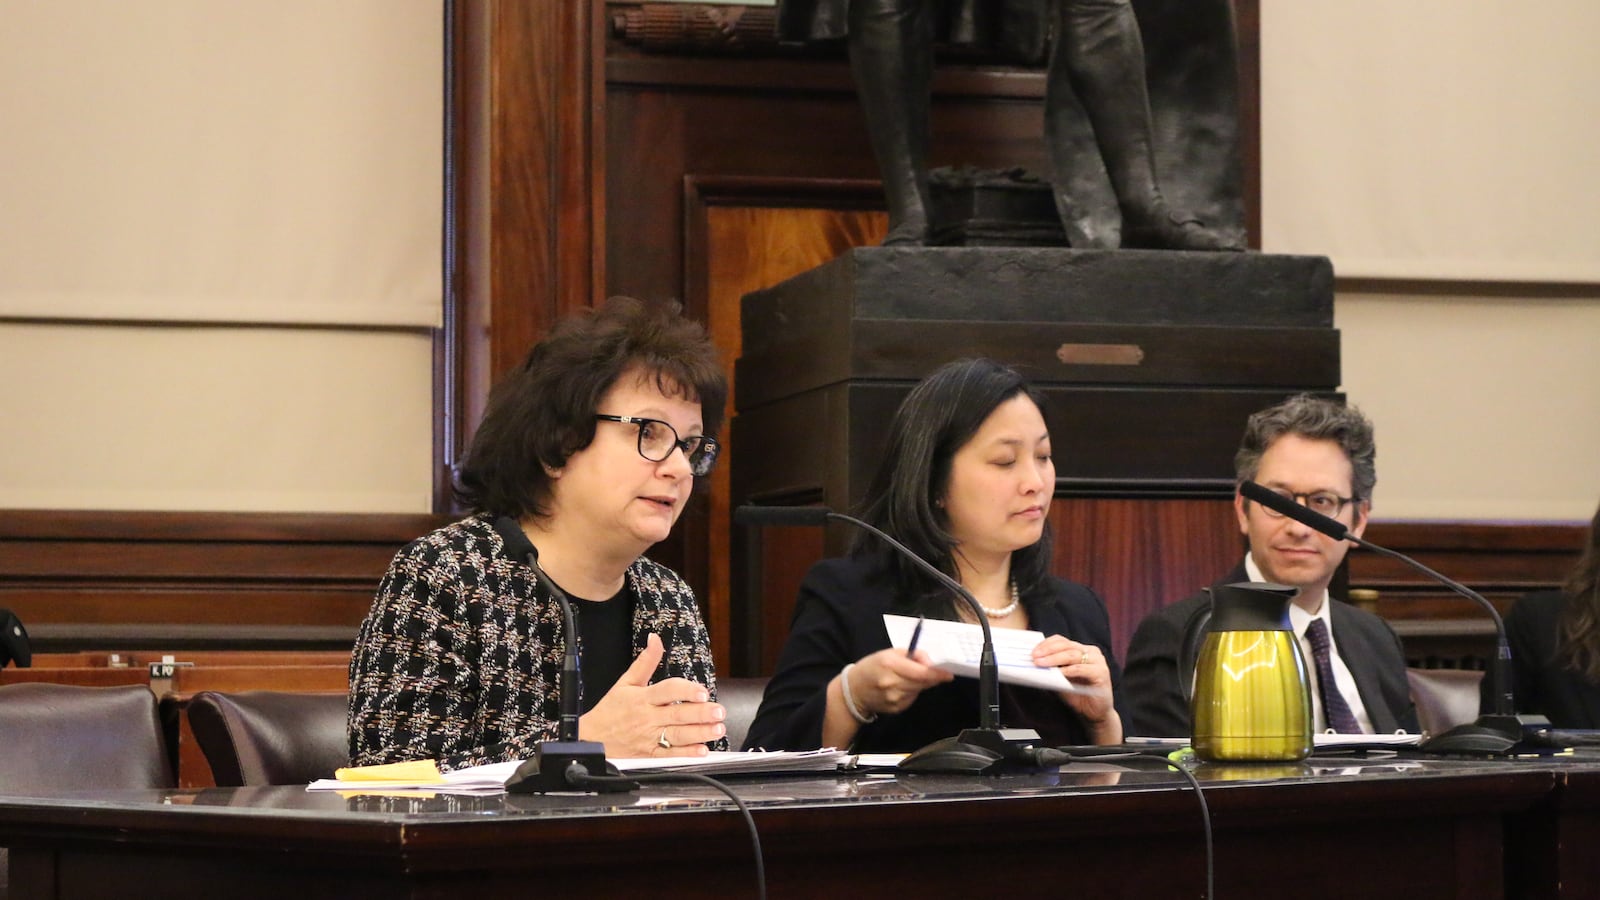 Corinne Rello-Anselmi (left) testifies among senior education department officials at a City Council hearing on special education.